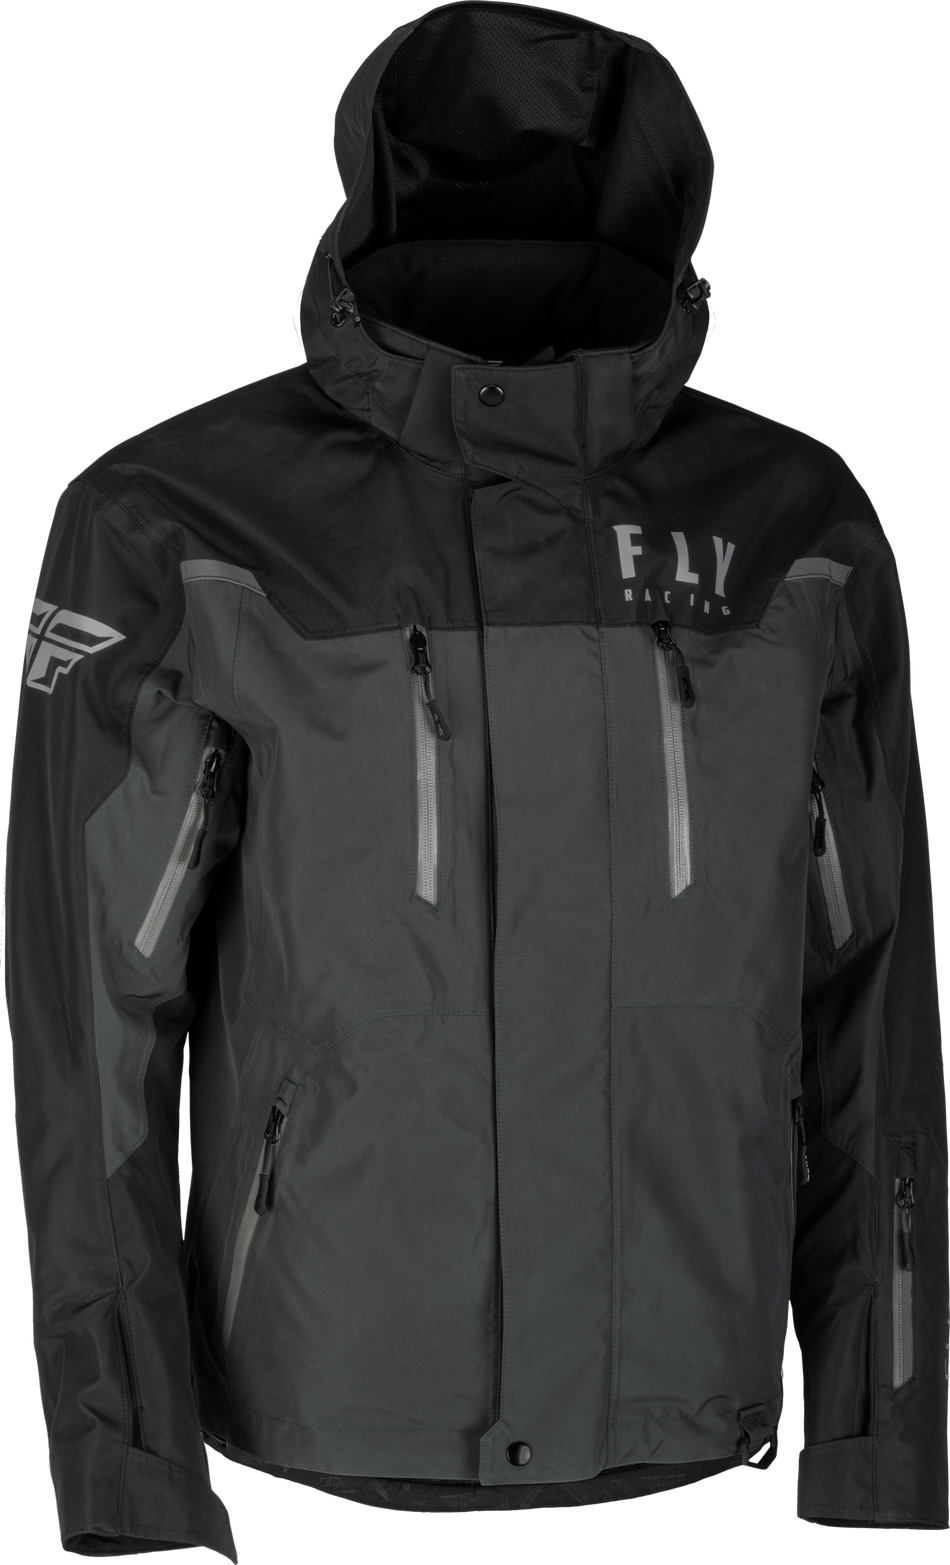 FLY RACING Incline Jacket Black/Charcoal 4x 470-41034X